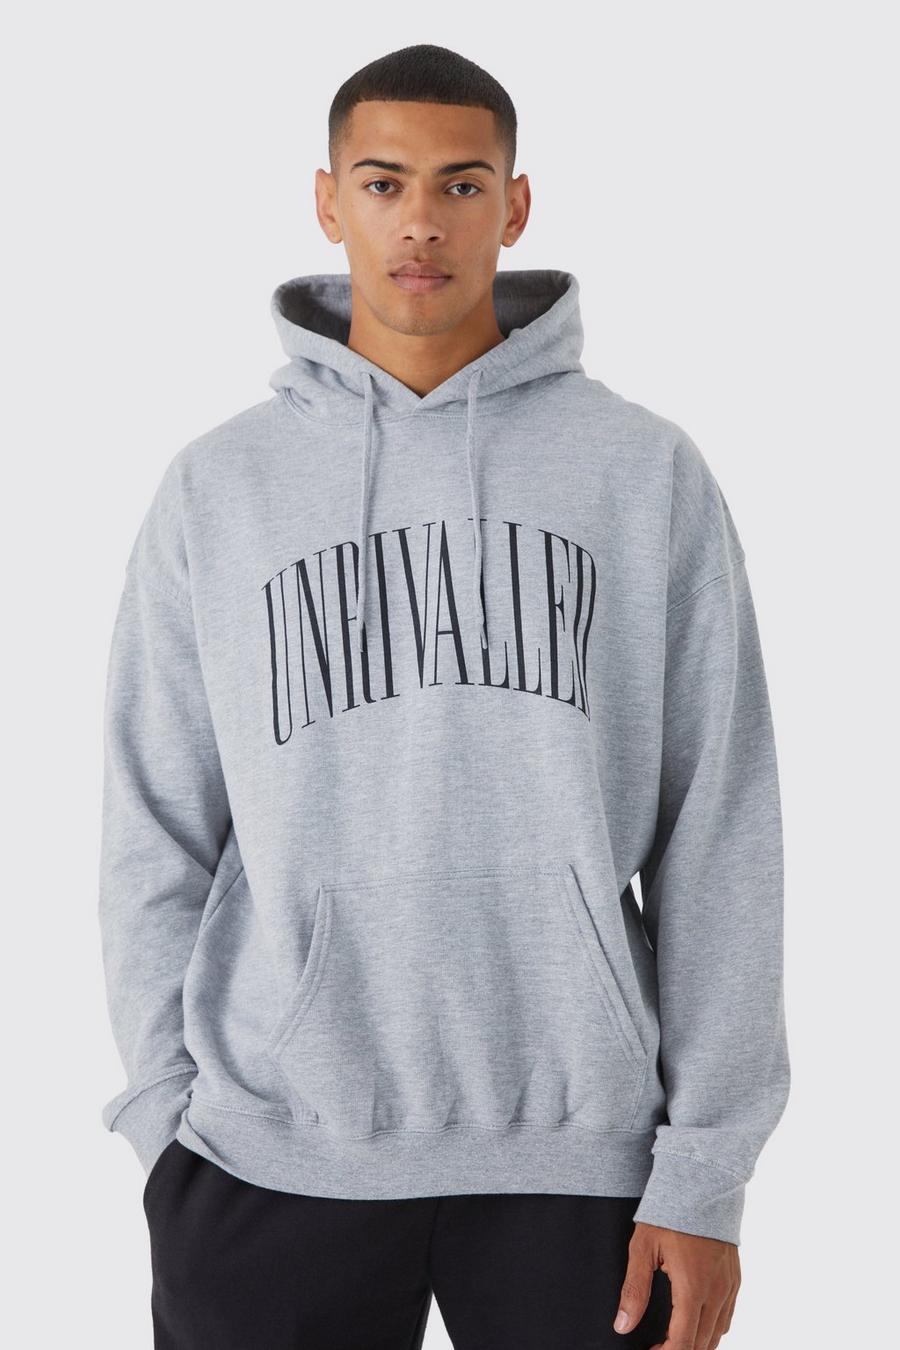 Grey marl Oversized Unrivalled Graphic Hoodie